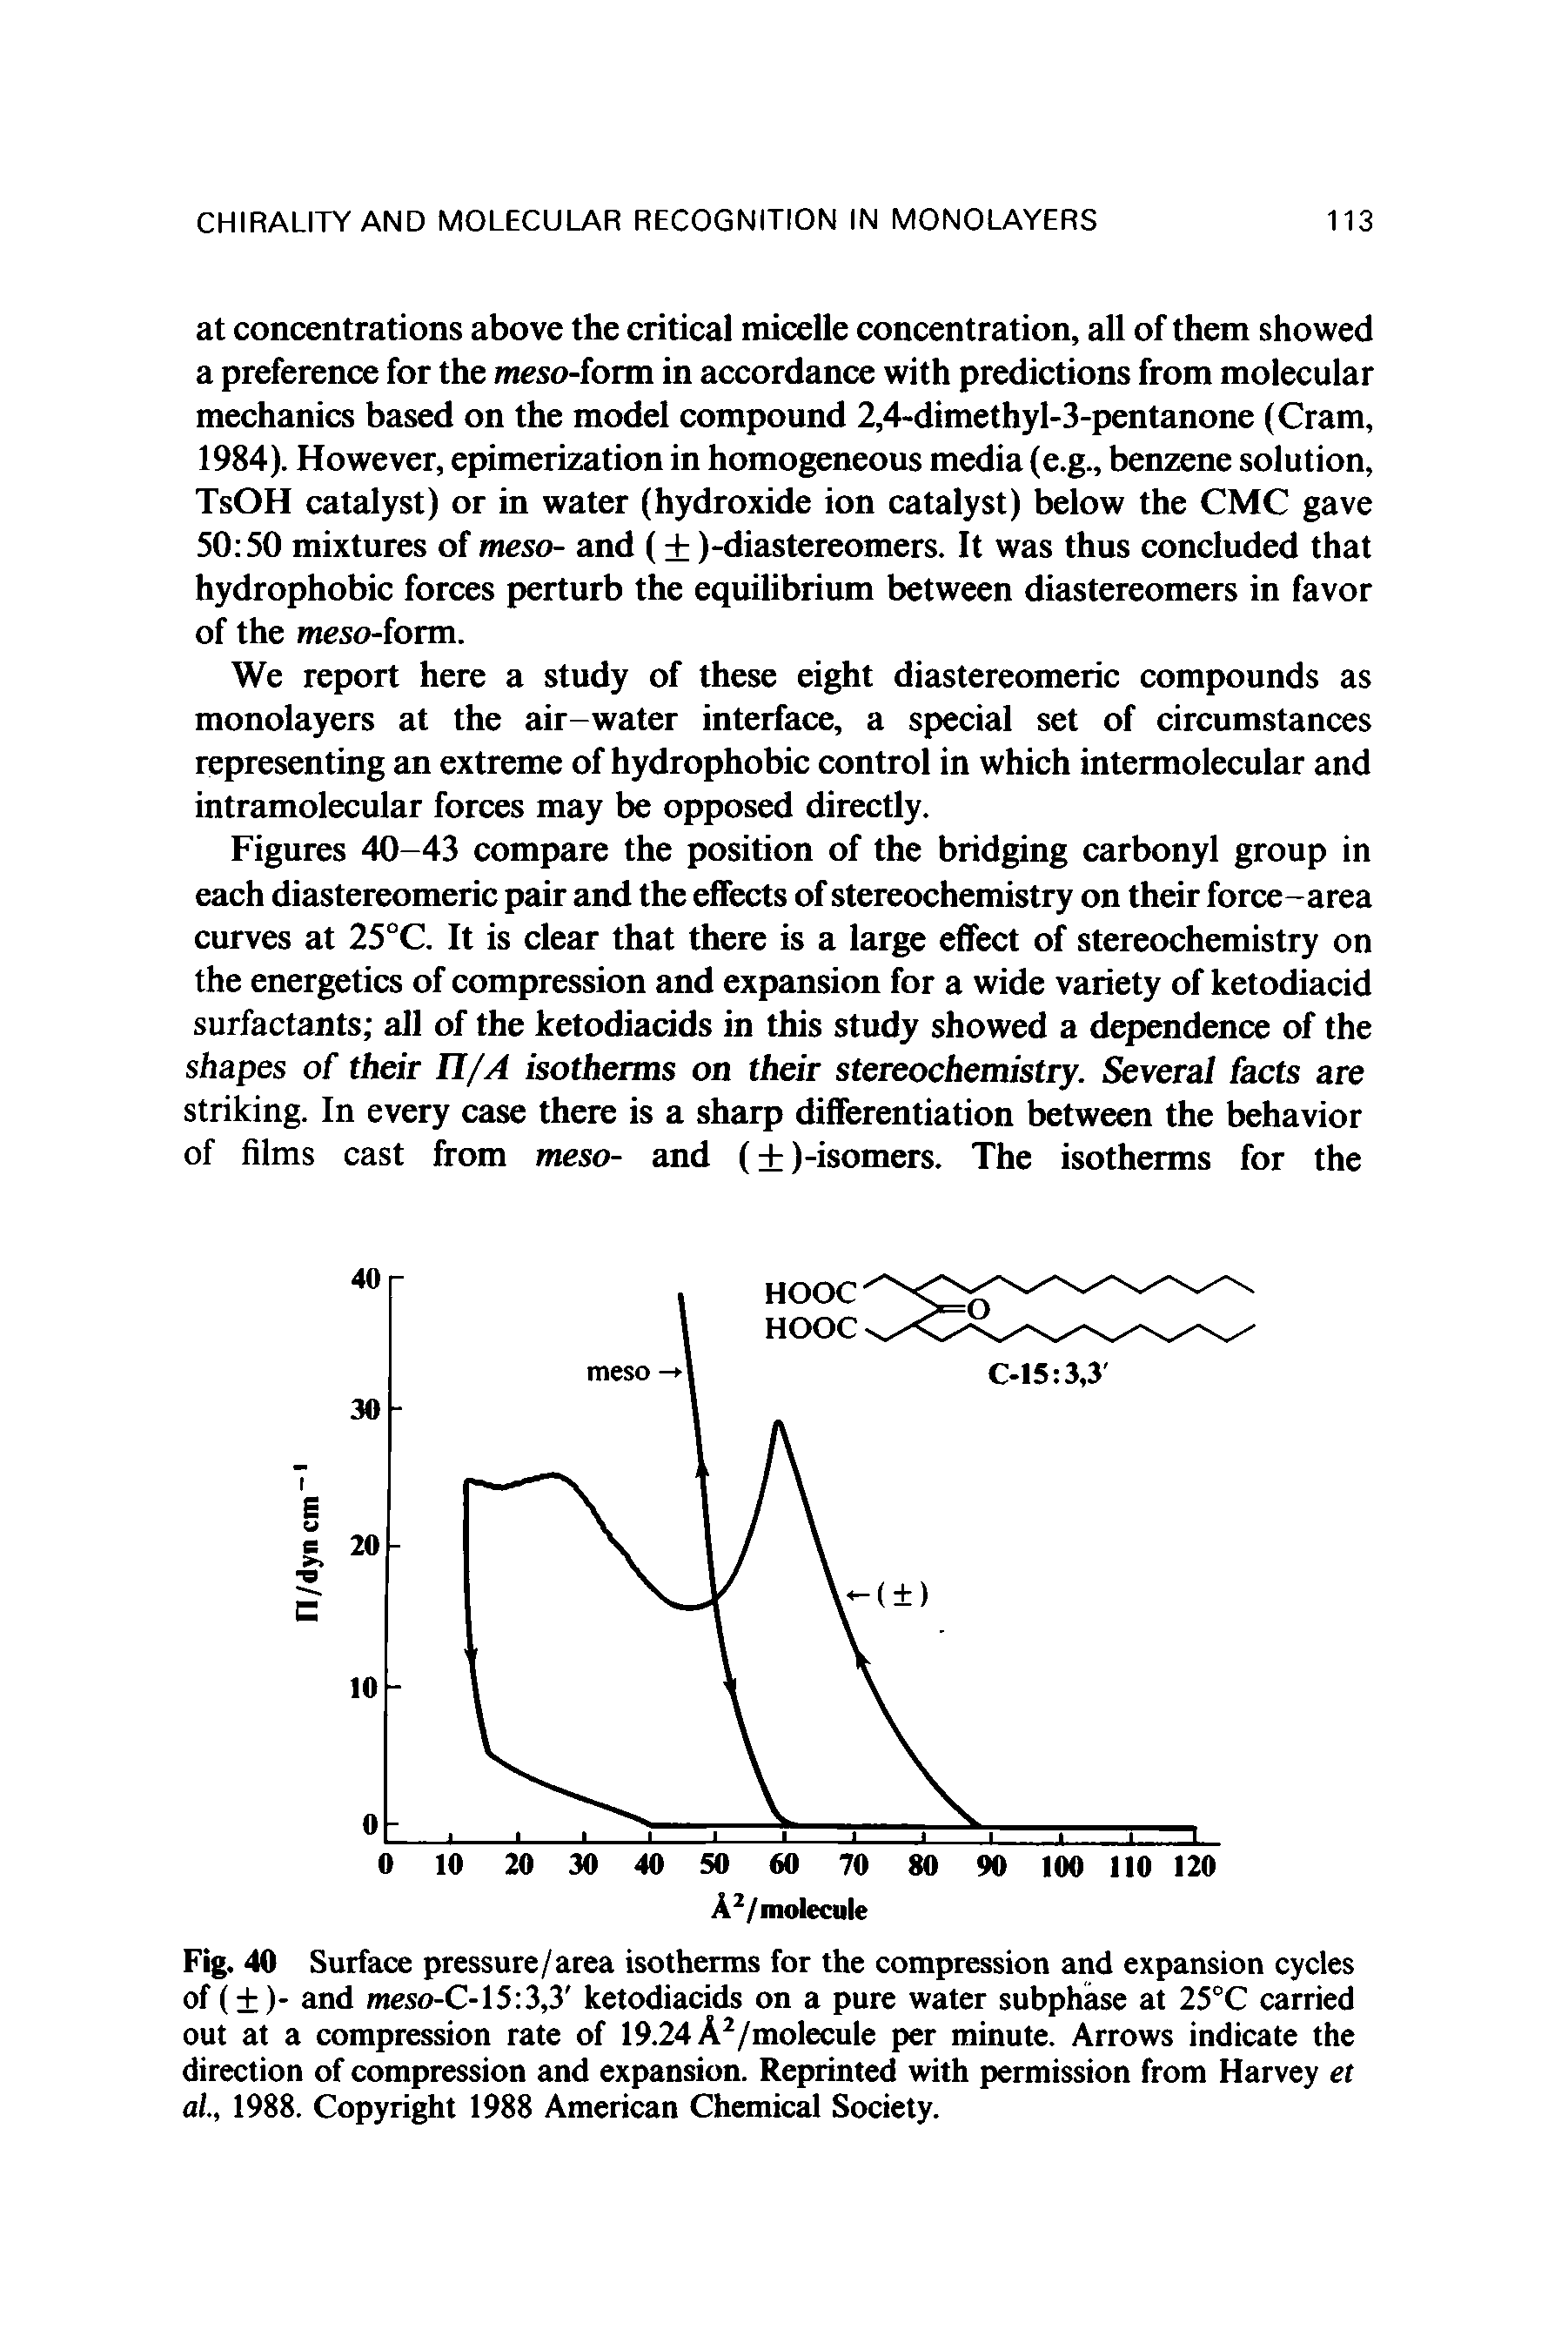 Figures 40-43 compare the position of the bridging carbonyl group in each diastereomeric pair and the effects of stereochemistry on their force-area curves at 25°C. It is clear that there is a large effect of stereochemistry on the energetics of compression and expansion for a wide variety of ketodiacid surfactants all of the ketodiadds in this study showed a dependence of the shapes of their IT/A isotherms on their stereochemistry. Several facts are striking. In every case there is a sharp differentiation between the behavior of films cast from meso- and ( )-isomers. The isotherms for the...